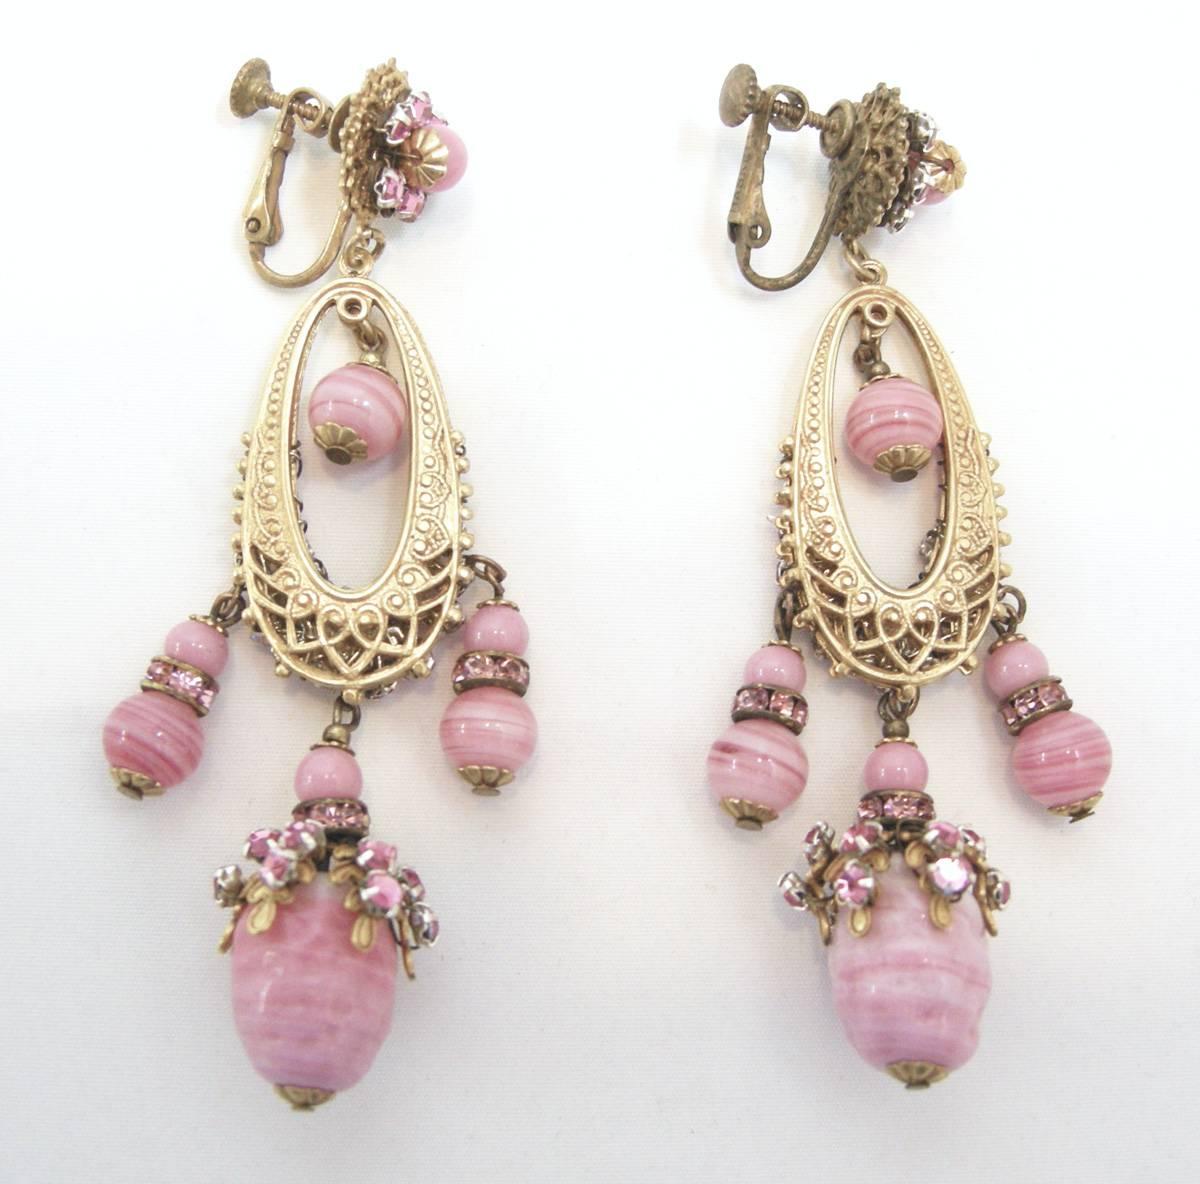 Women's Vintage Rare Signed Miriam Haskell 1940s Pink Duster Earrings   